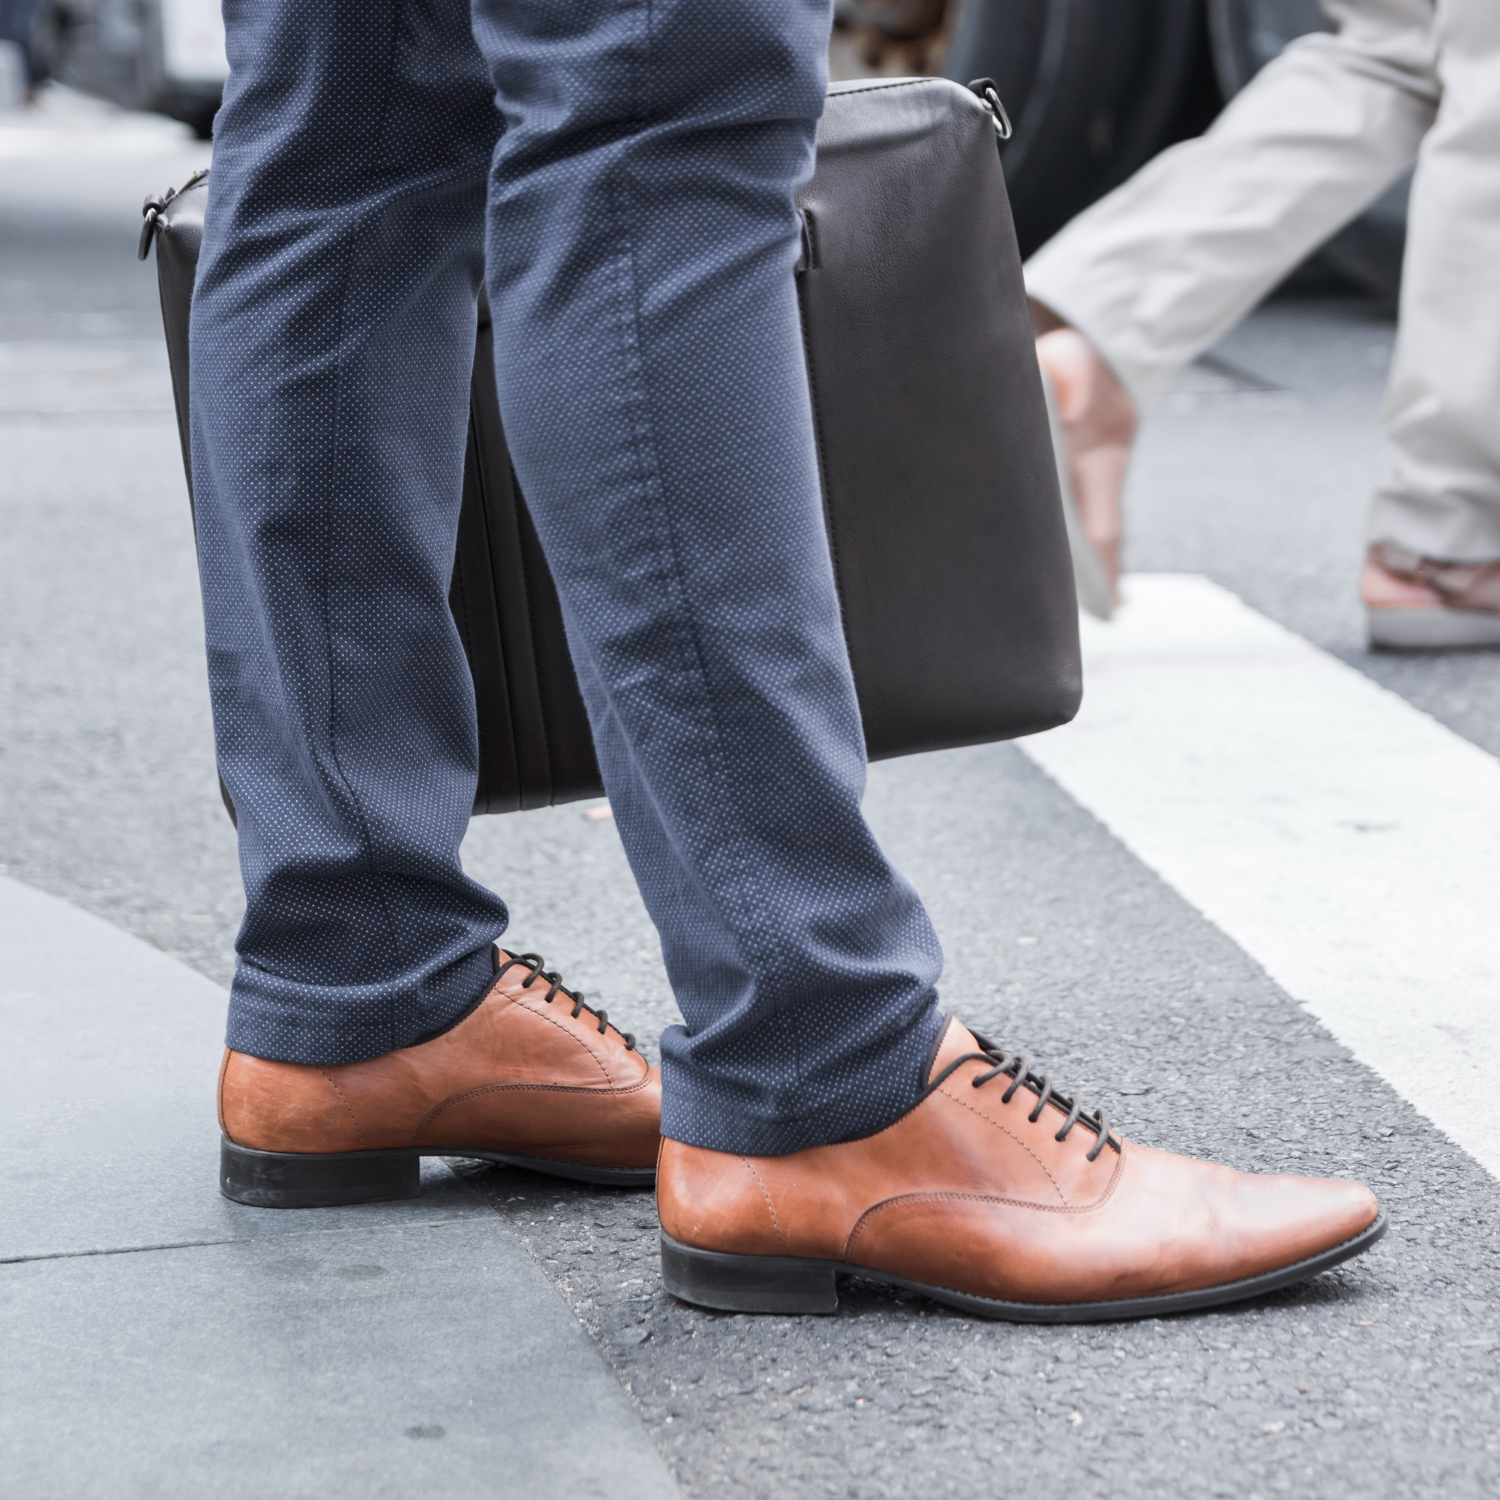 Crop legs of businessman near road. Foot health at work concept.